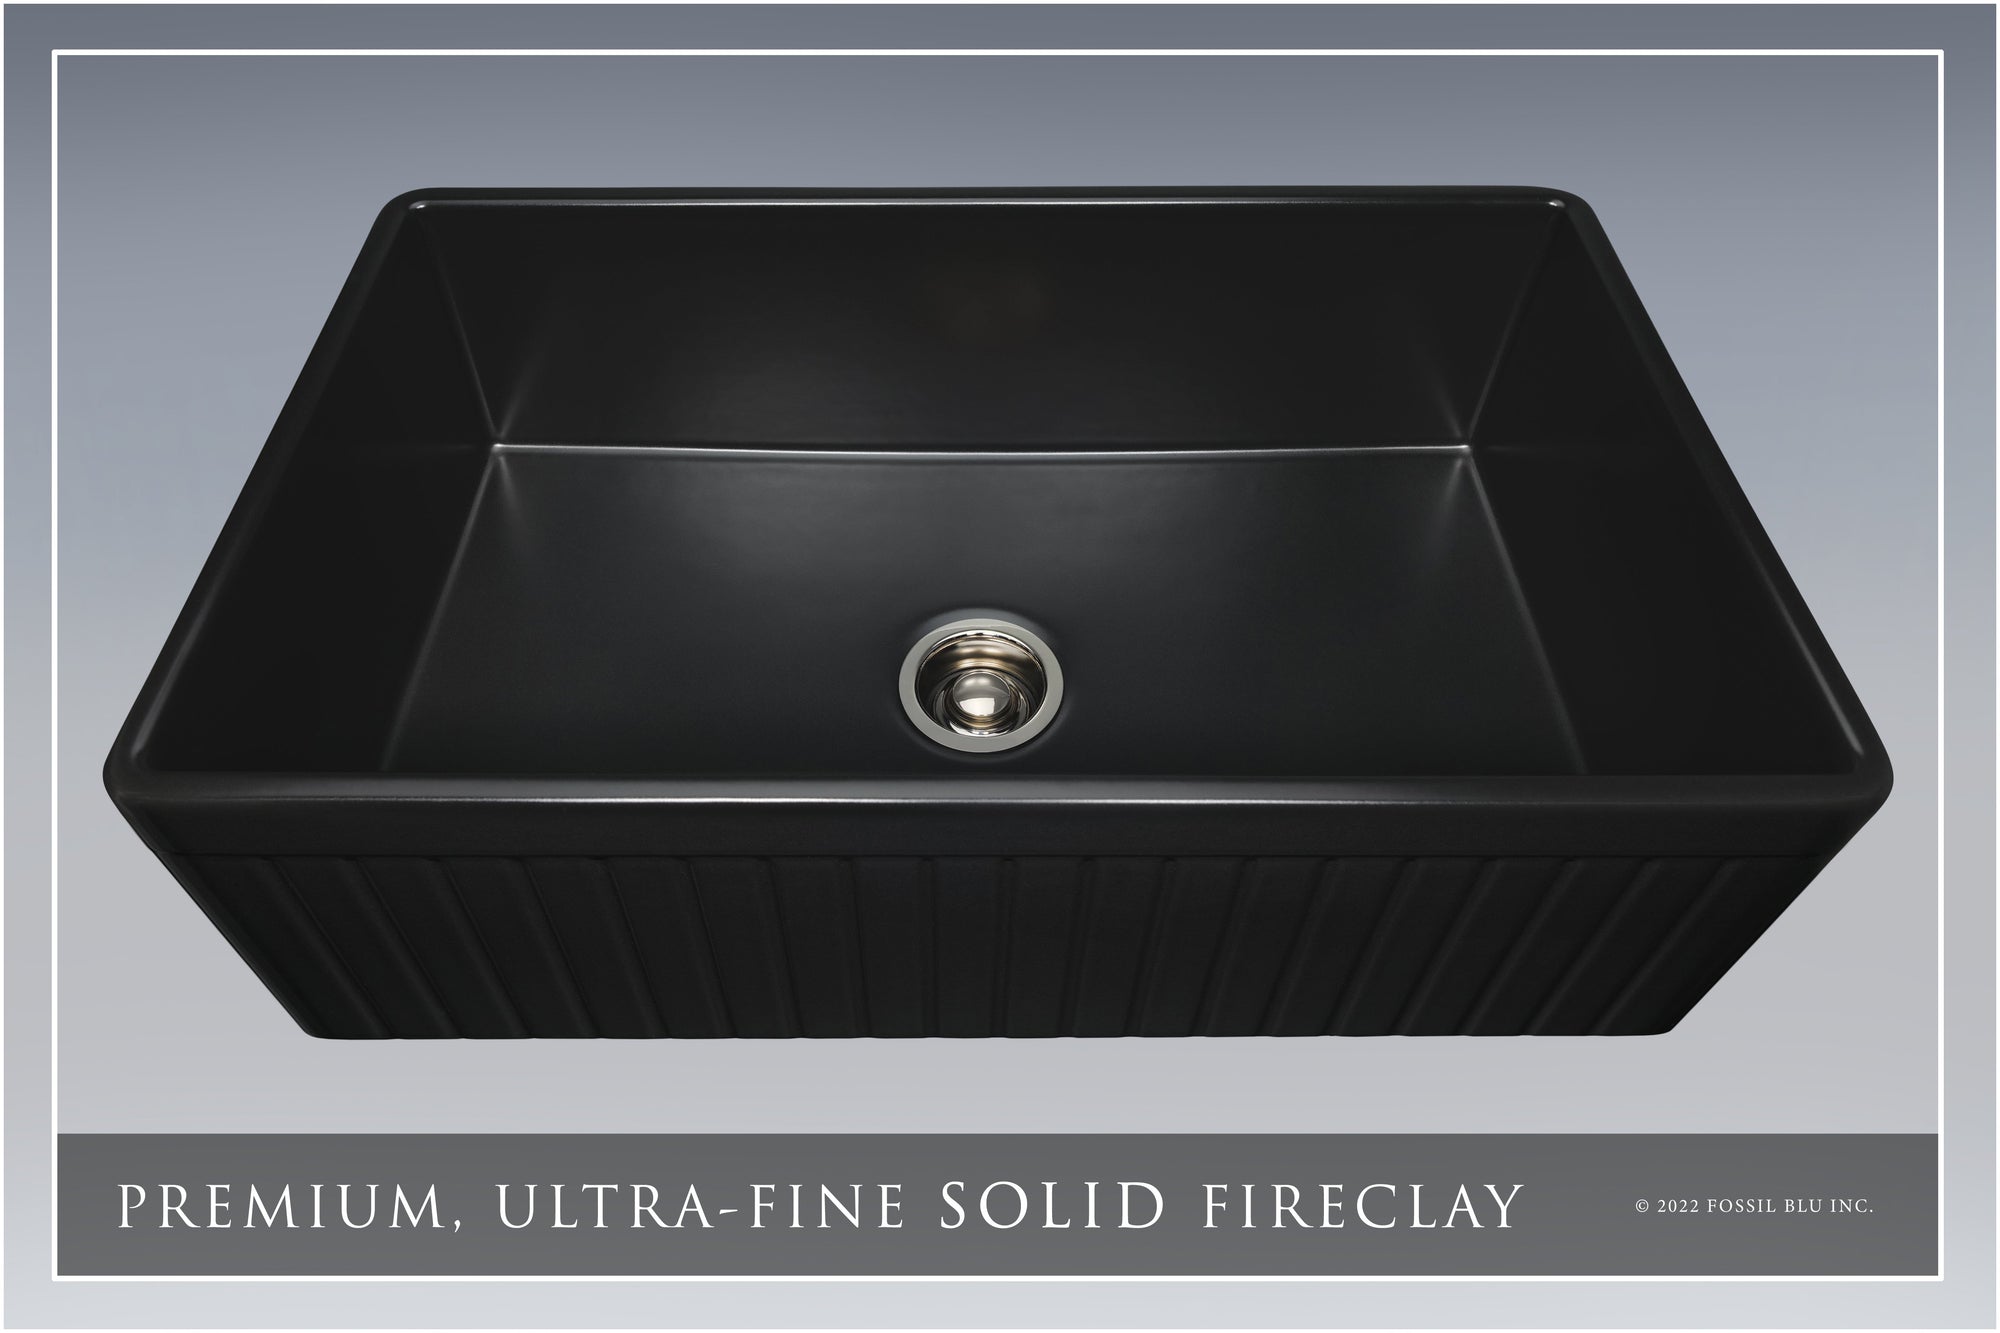 FSW1027PN LUXURY 33-INCH SOLID FIRECLAY FARMHOUSE SINK, MATTE BLACK, POL. NICKEL ACCS, FLUTED FRONT